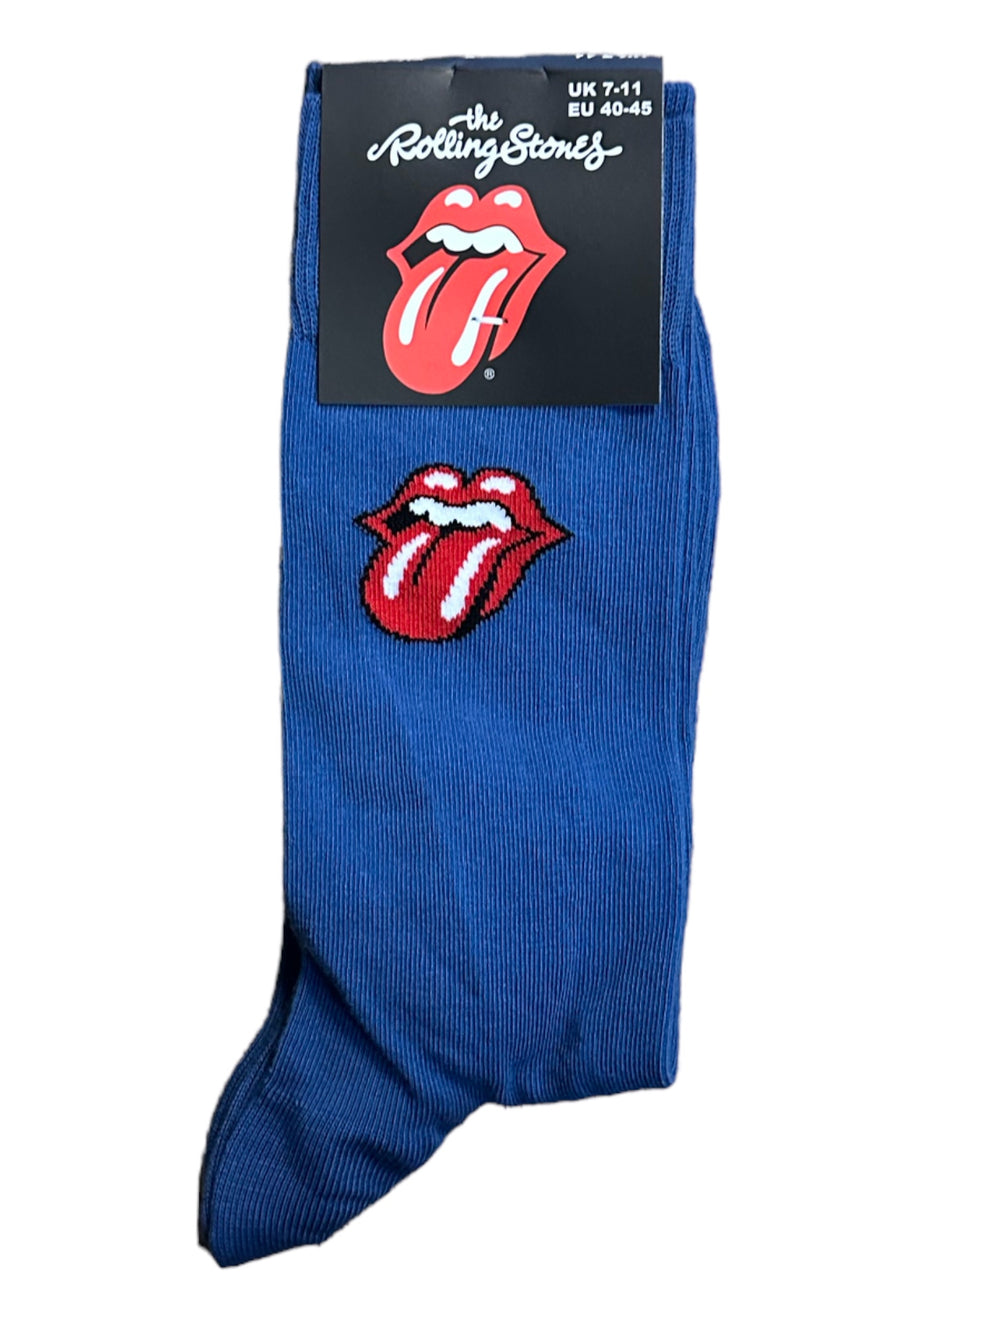 Rolling Stones The - BLUE VERTICLE Official Product 1 Pair Jacquard Socks NEW